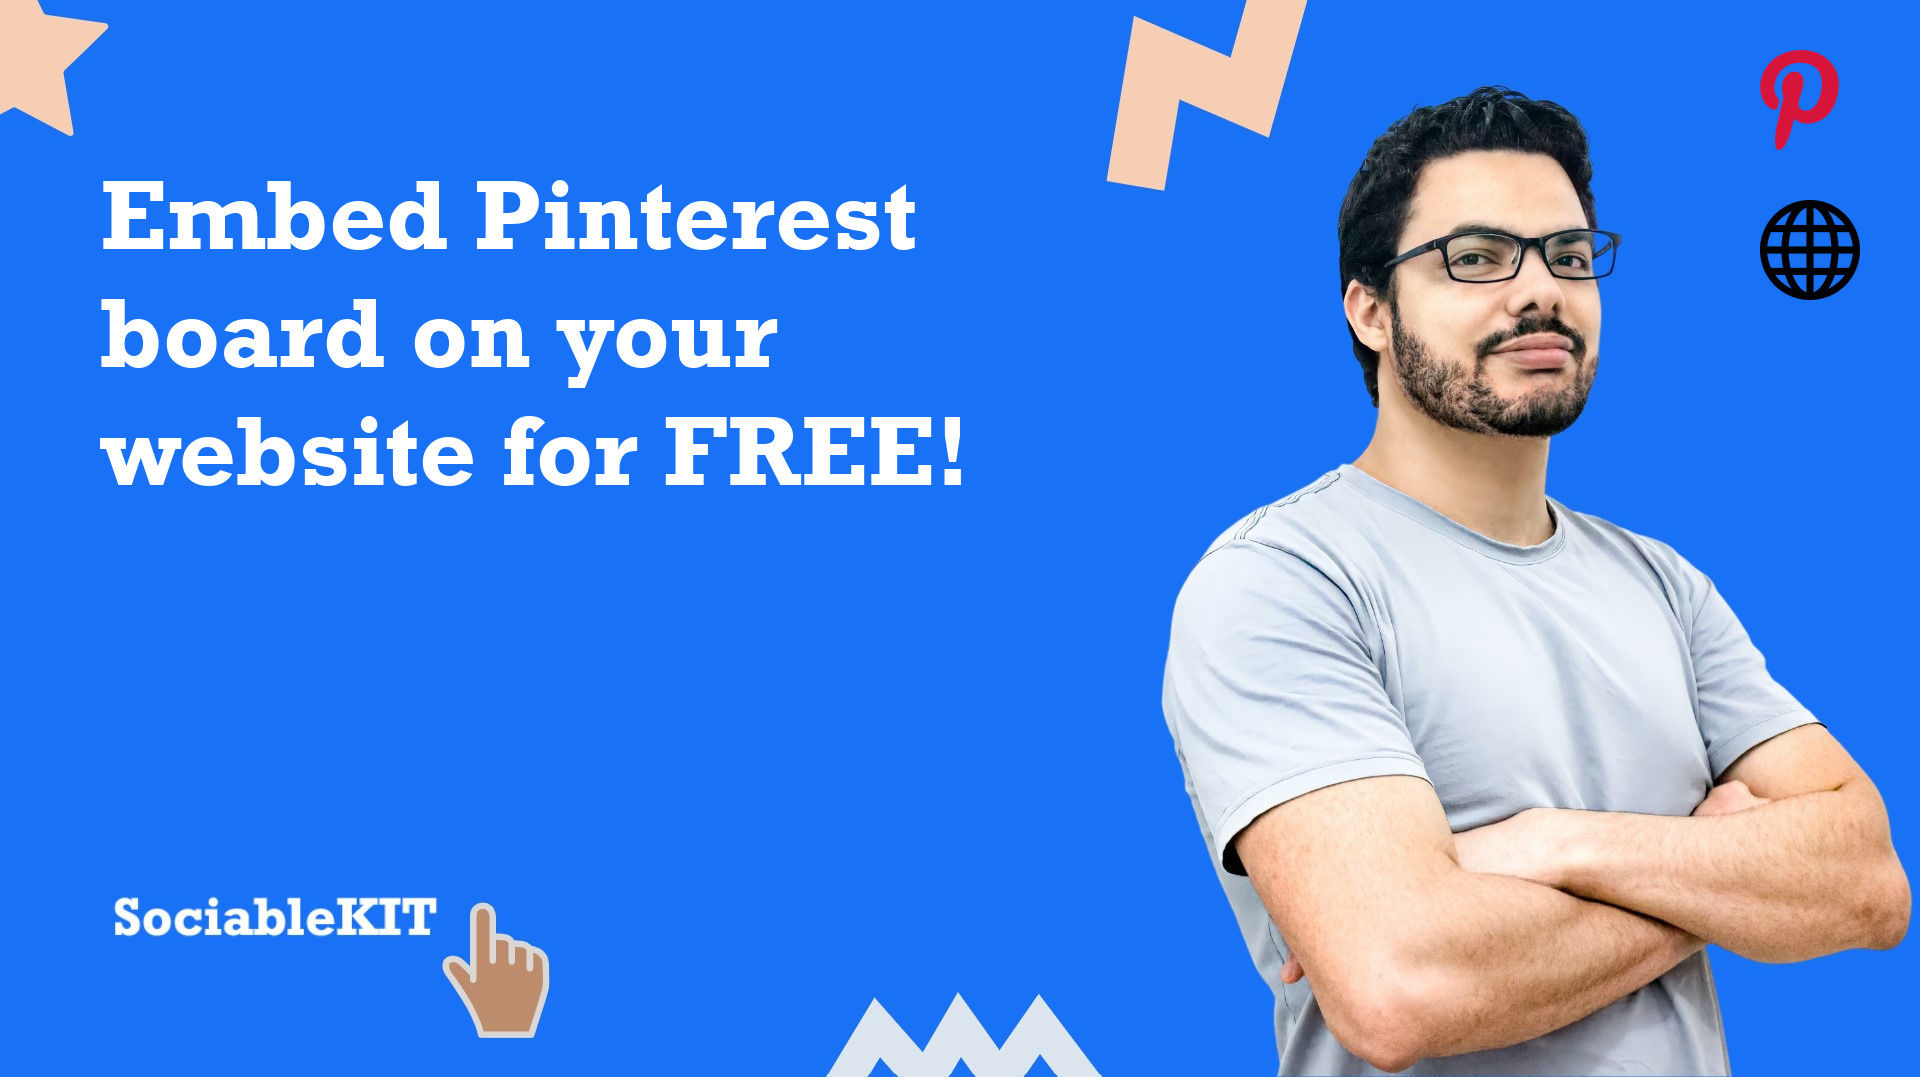 How to embed Pinterest board on your website for FREE?